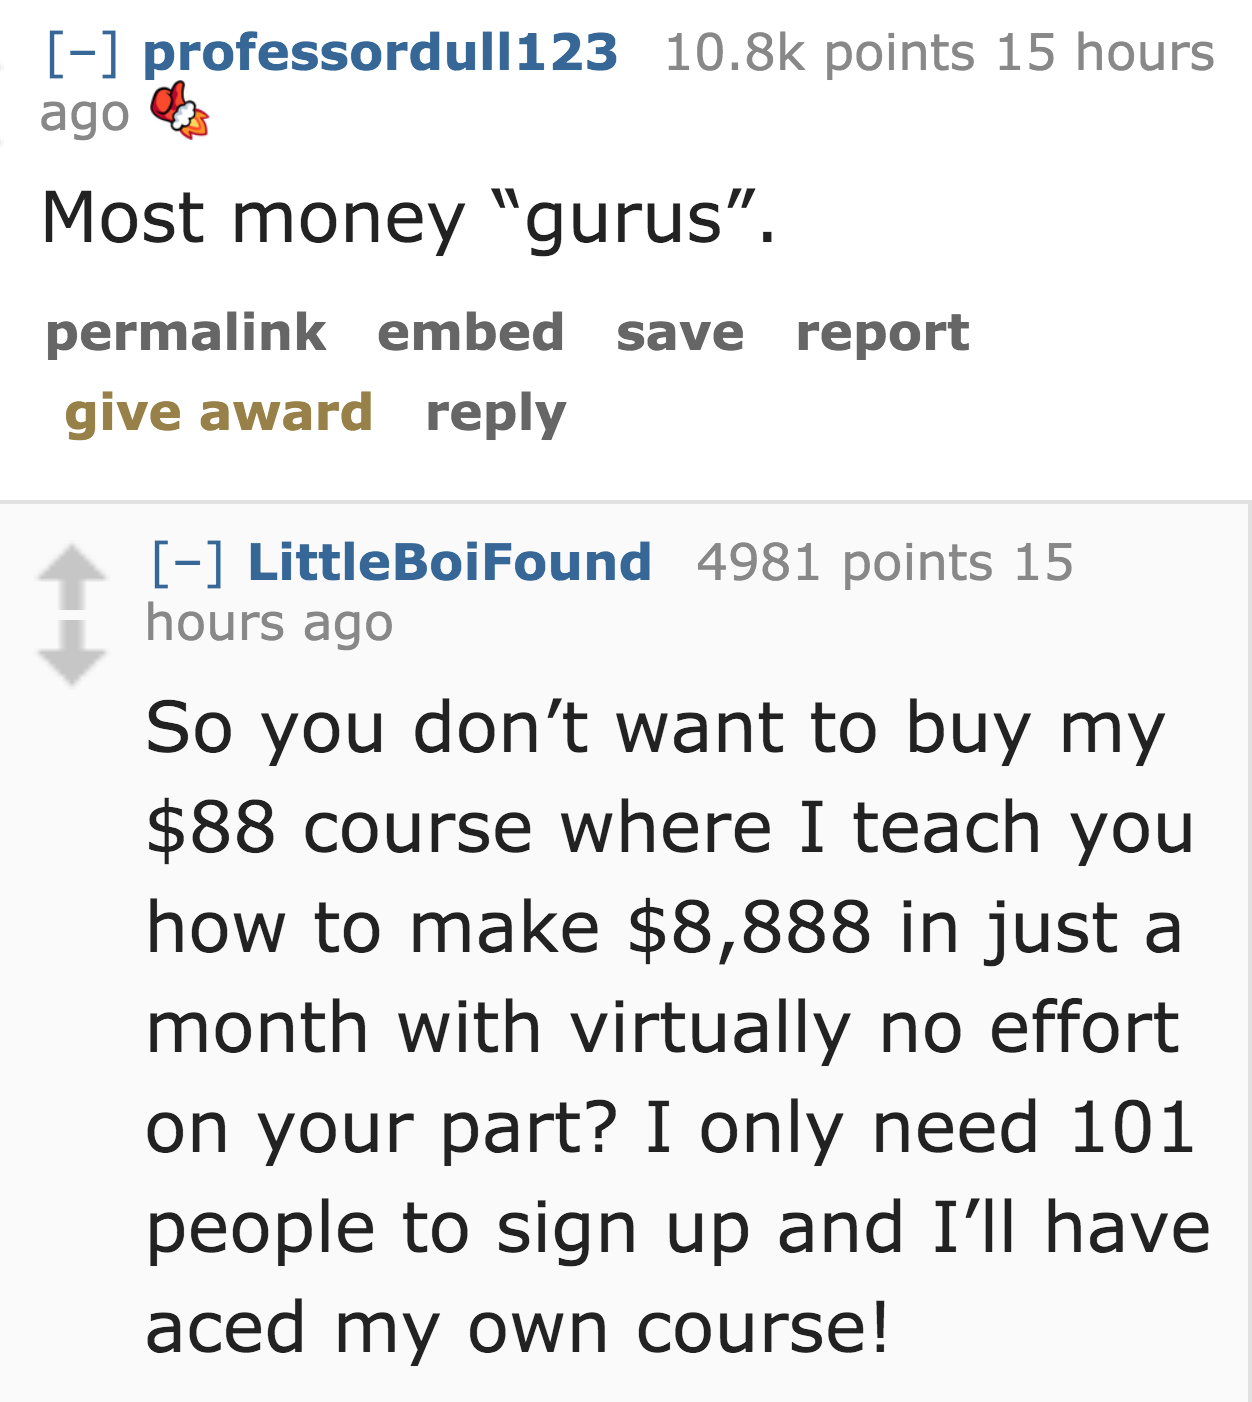 wodson park - professordull123 points 15 hours ago Most money "gurus. permalink embed save report give award LittleBoiFound 4981 points 15 hours ago So you don't want to buy my $88 course where I teach you how to make $8,888 in just a month with virtually